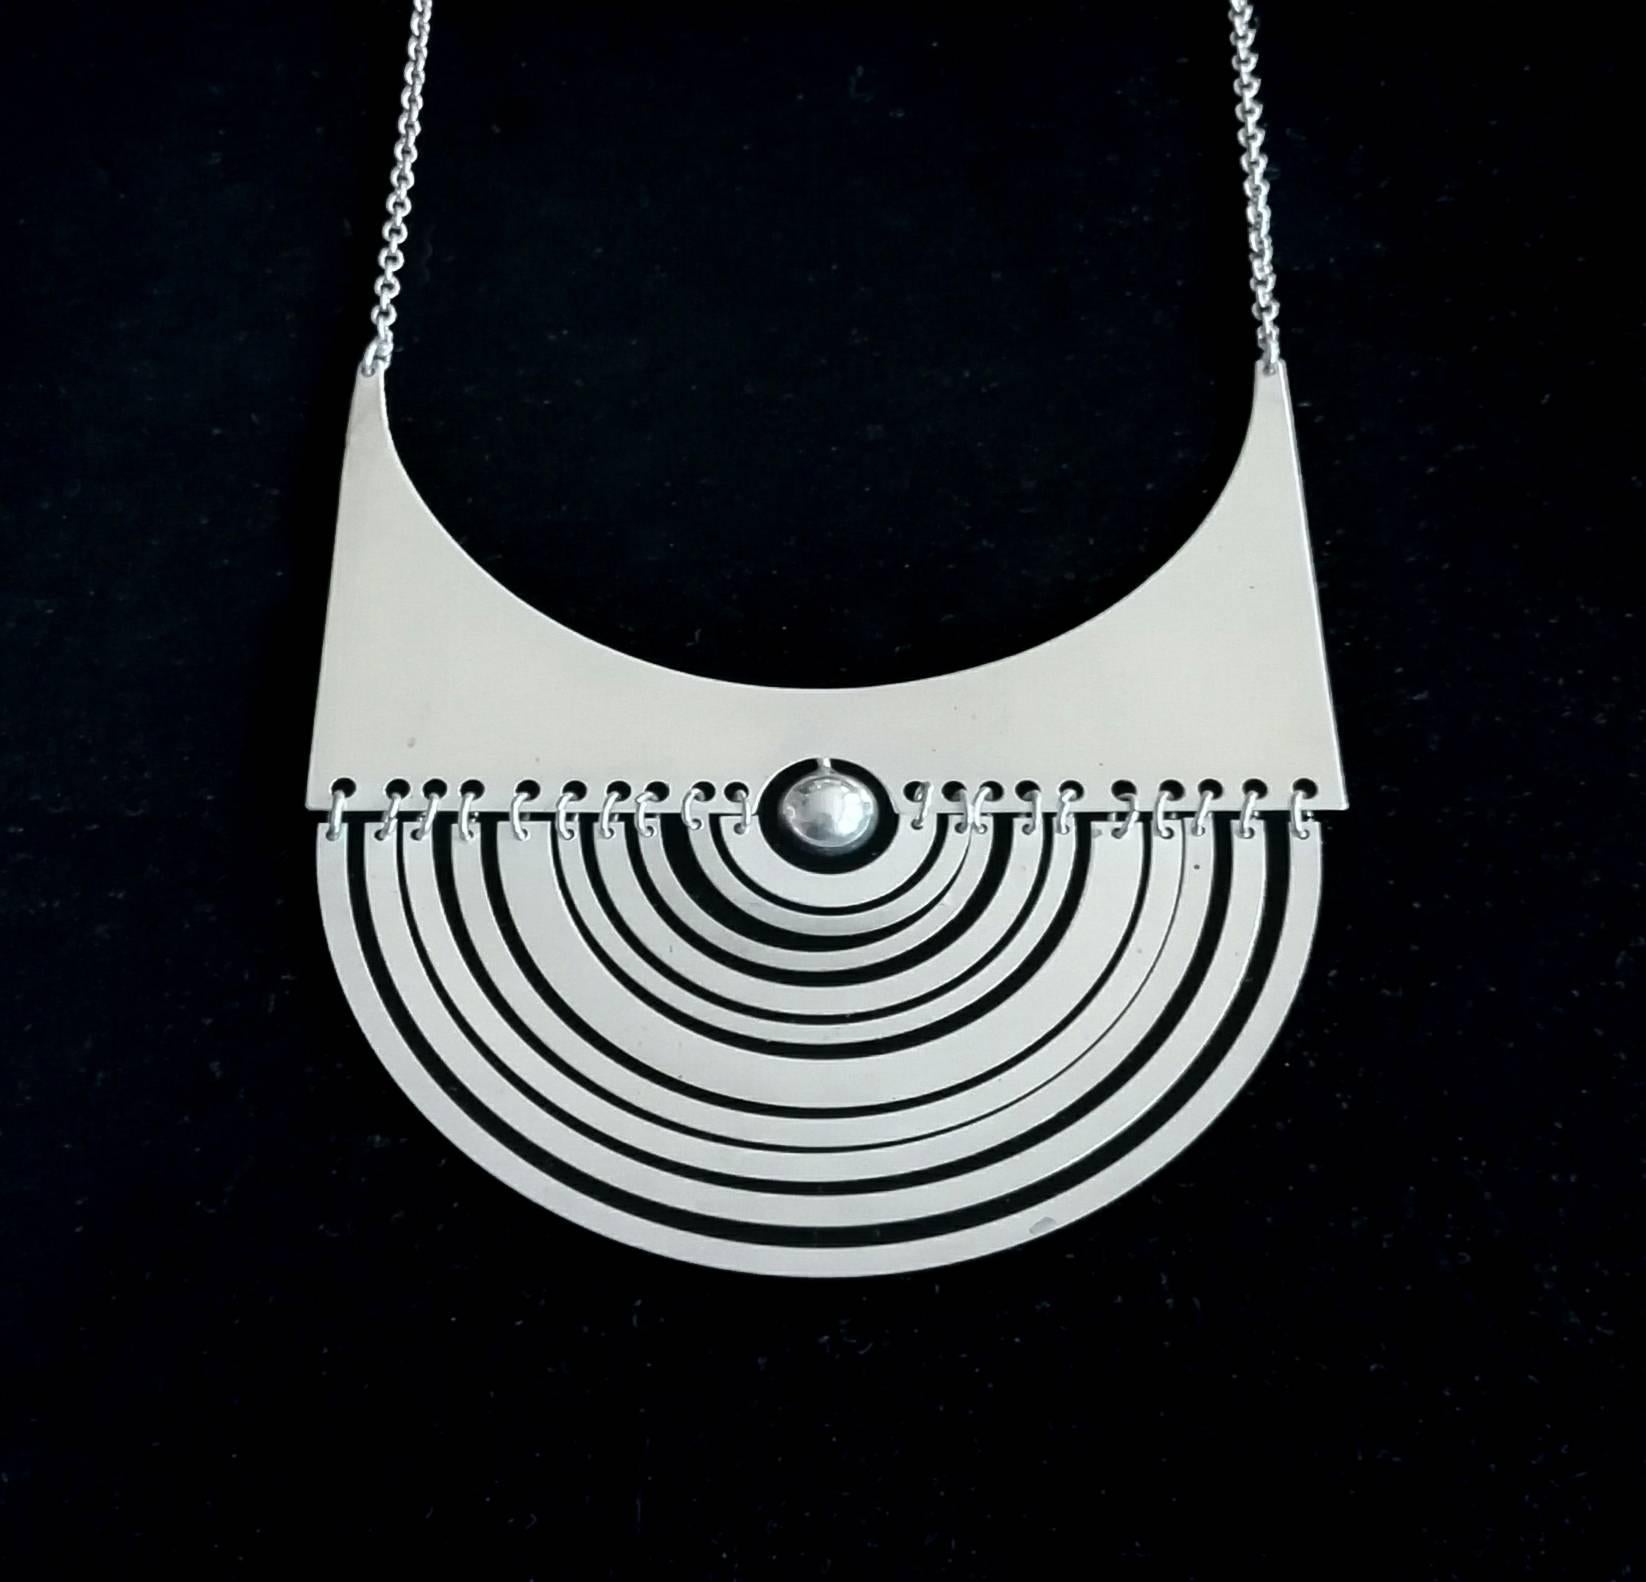 Tapio Wirkkala Half Moon "Puolikuu" necklace

Finland, circa 1972 (early example and not a reproduction)

Sterling silver

Produced by N Westerback, Finland
Impressed with N7, silver mark, Finnish assay and date marks.

Chain 18 in
Pendant